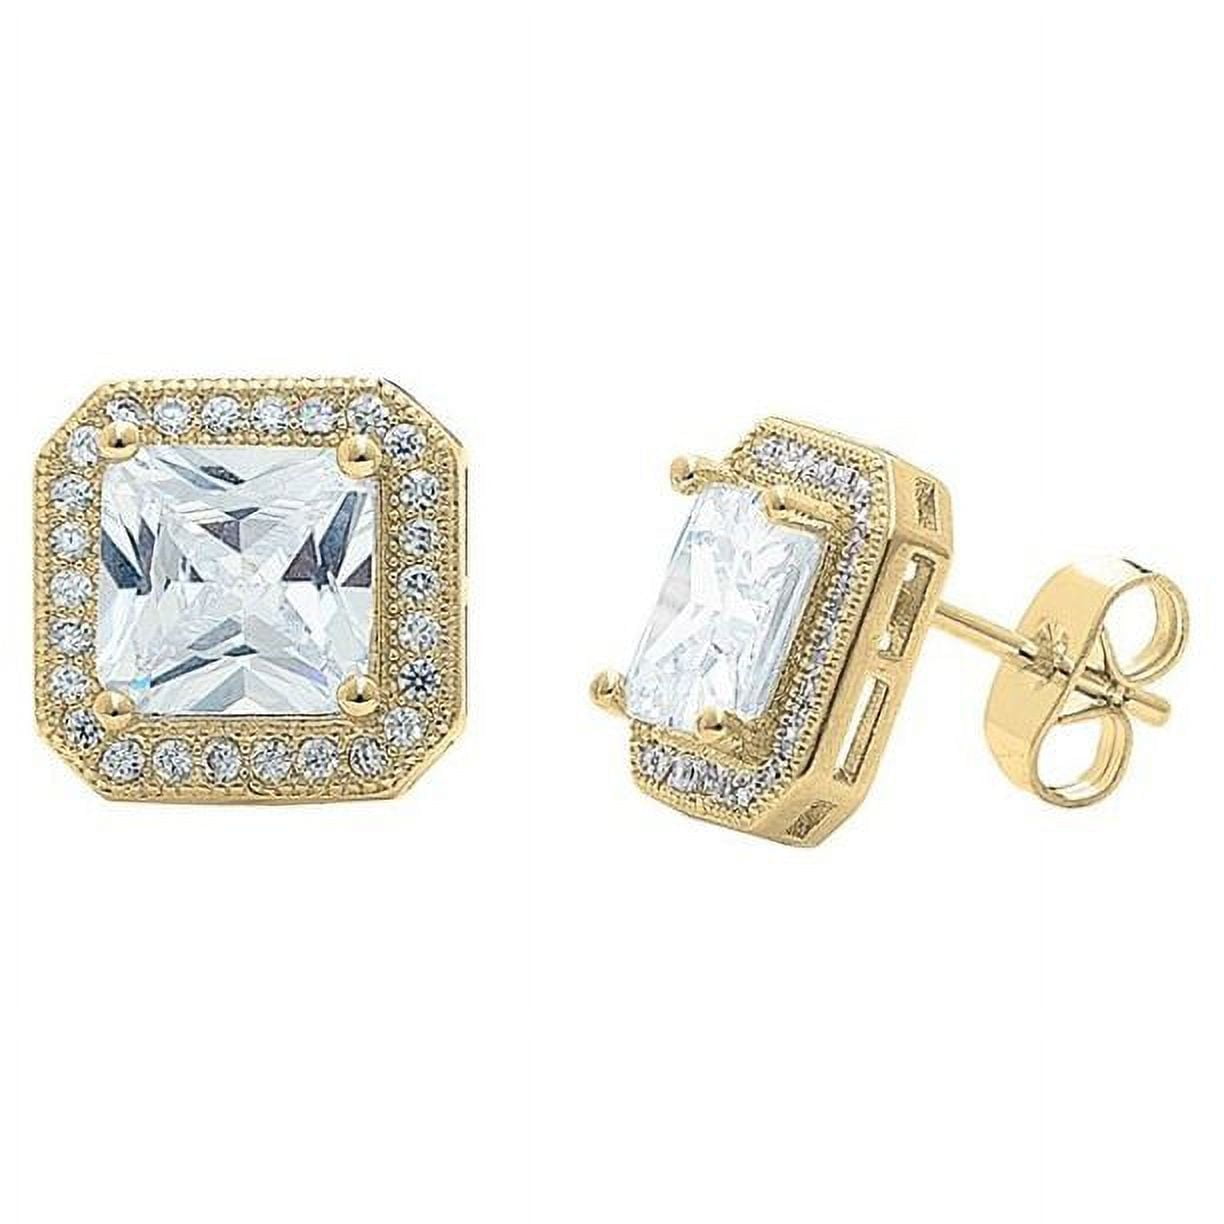 Cate & Chloe Norah 18k Yellow Gold Plated CZ Stud Earrings | Women's Crystal Earrings, Jewelry Gift for Her - image 1 of 7